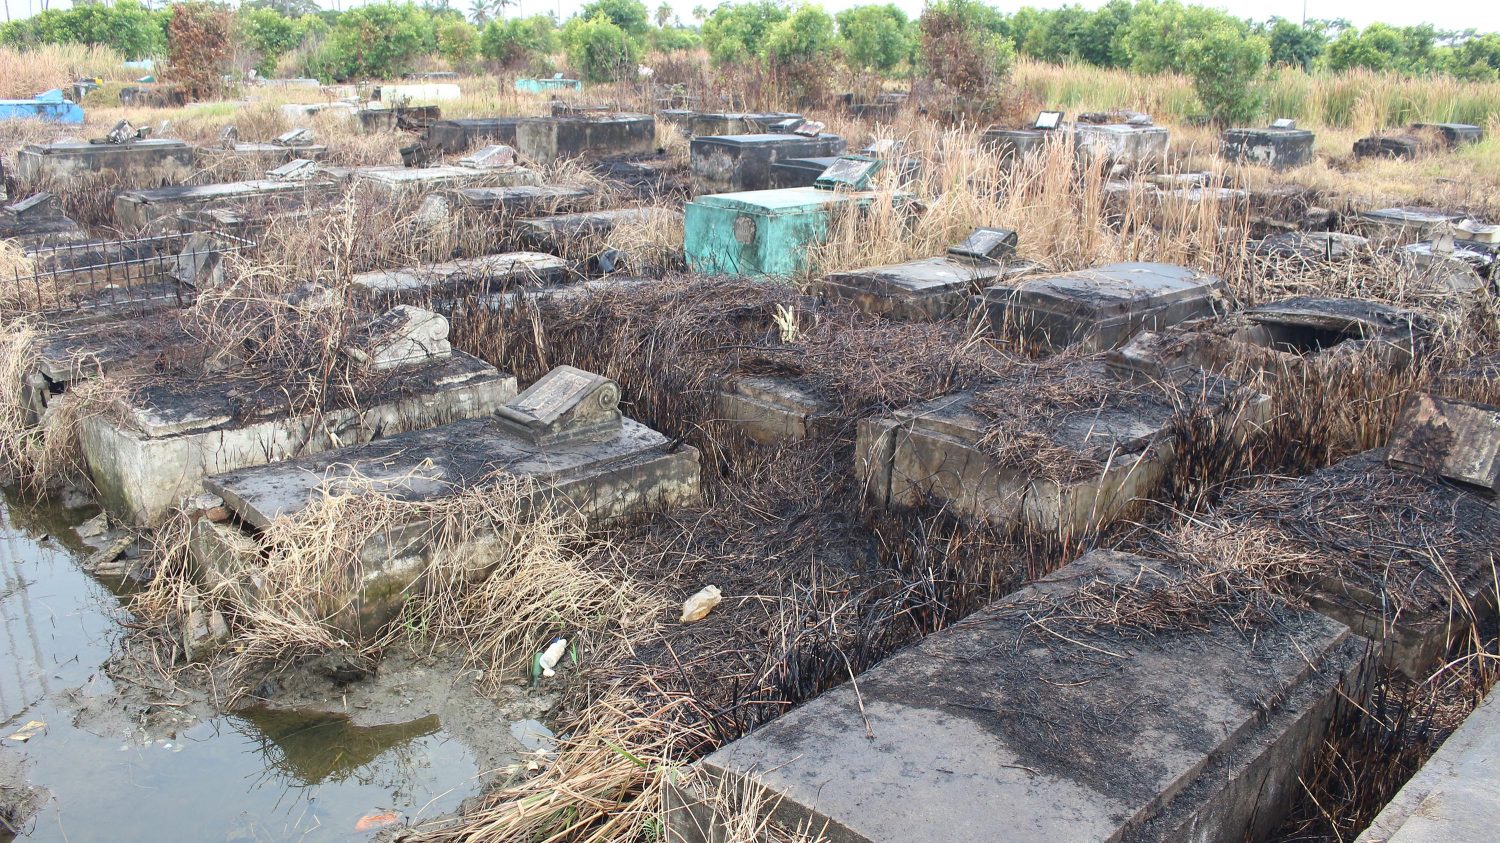 City Hall has engaged contractors to clean and clear the Le Repentir Cemetery at a cost of over $100 million. While the contract scope includes the removal of debris, there have been reports of grass being burnt rather than removed. In this Keno George photo, broken and cracked tombs can be seen surrounded by burnt and blackened grass.
